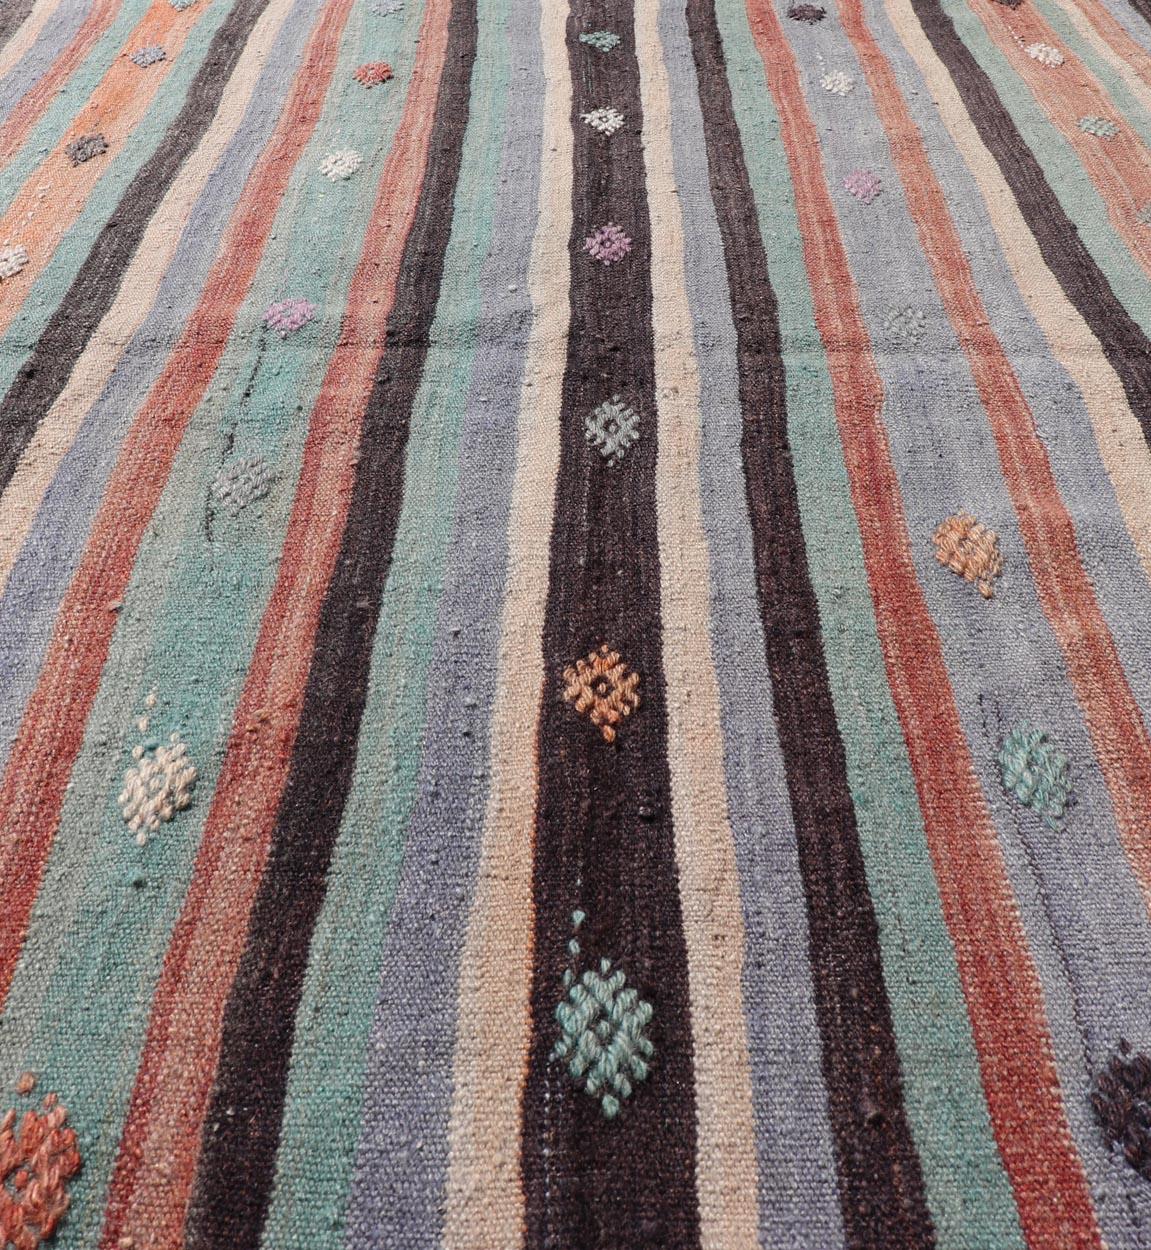 Hand-Woven Vintage Turkish Kilim in Multi Colors and Geometric Tribal Motifs  For Sale